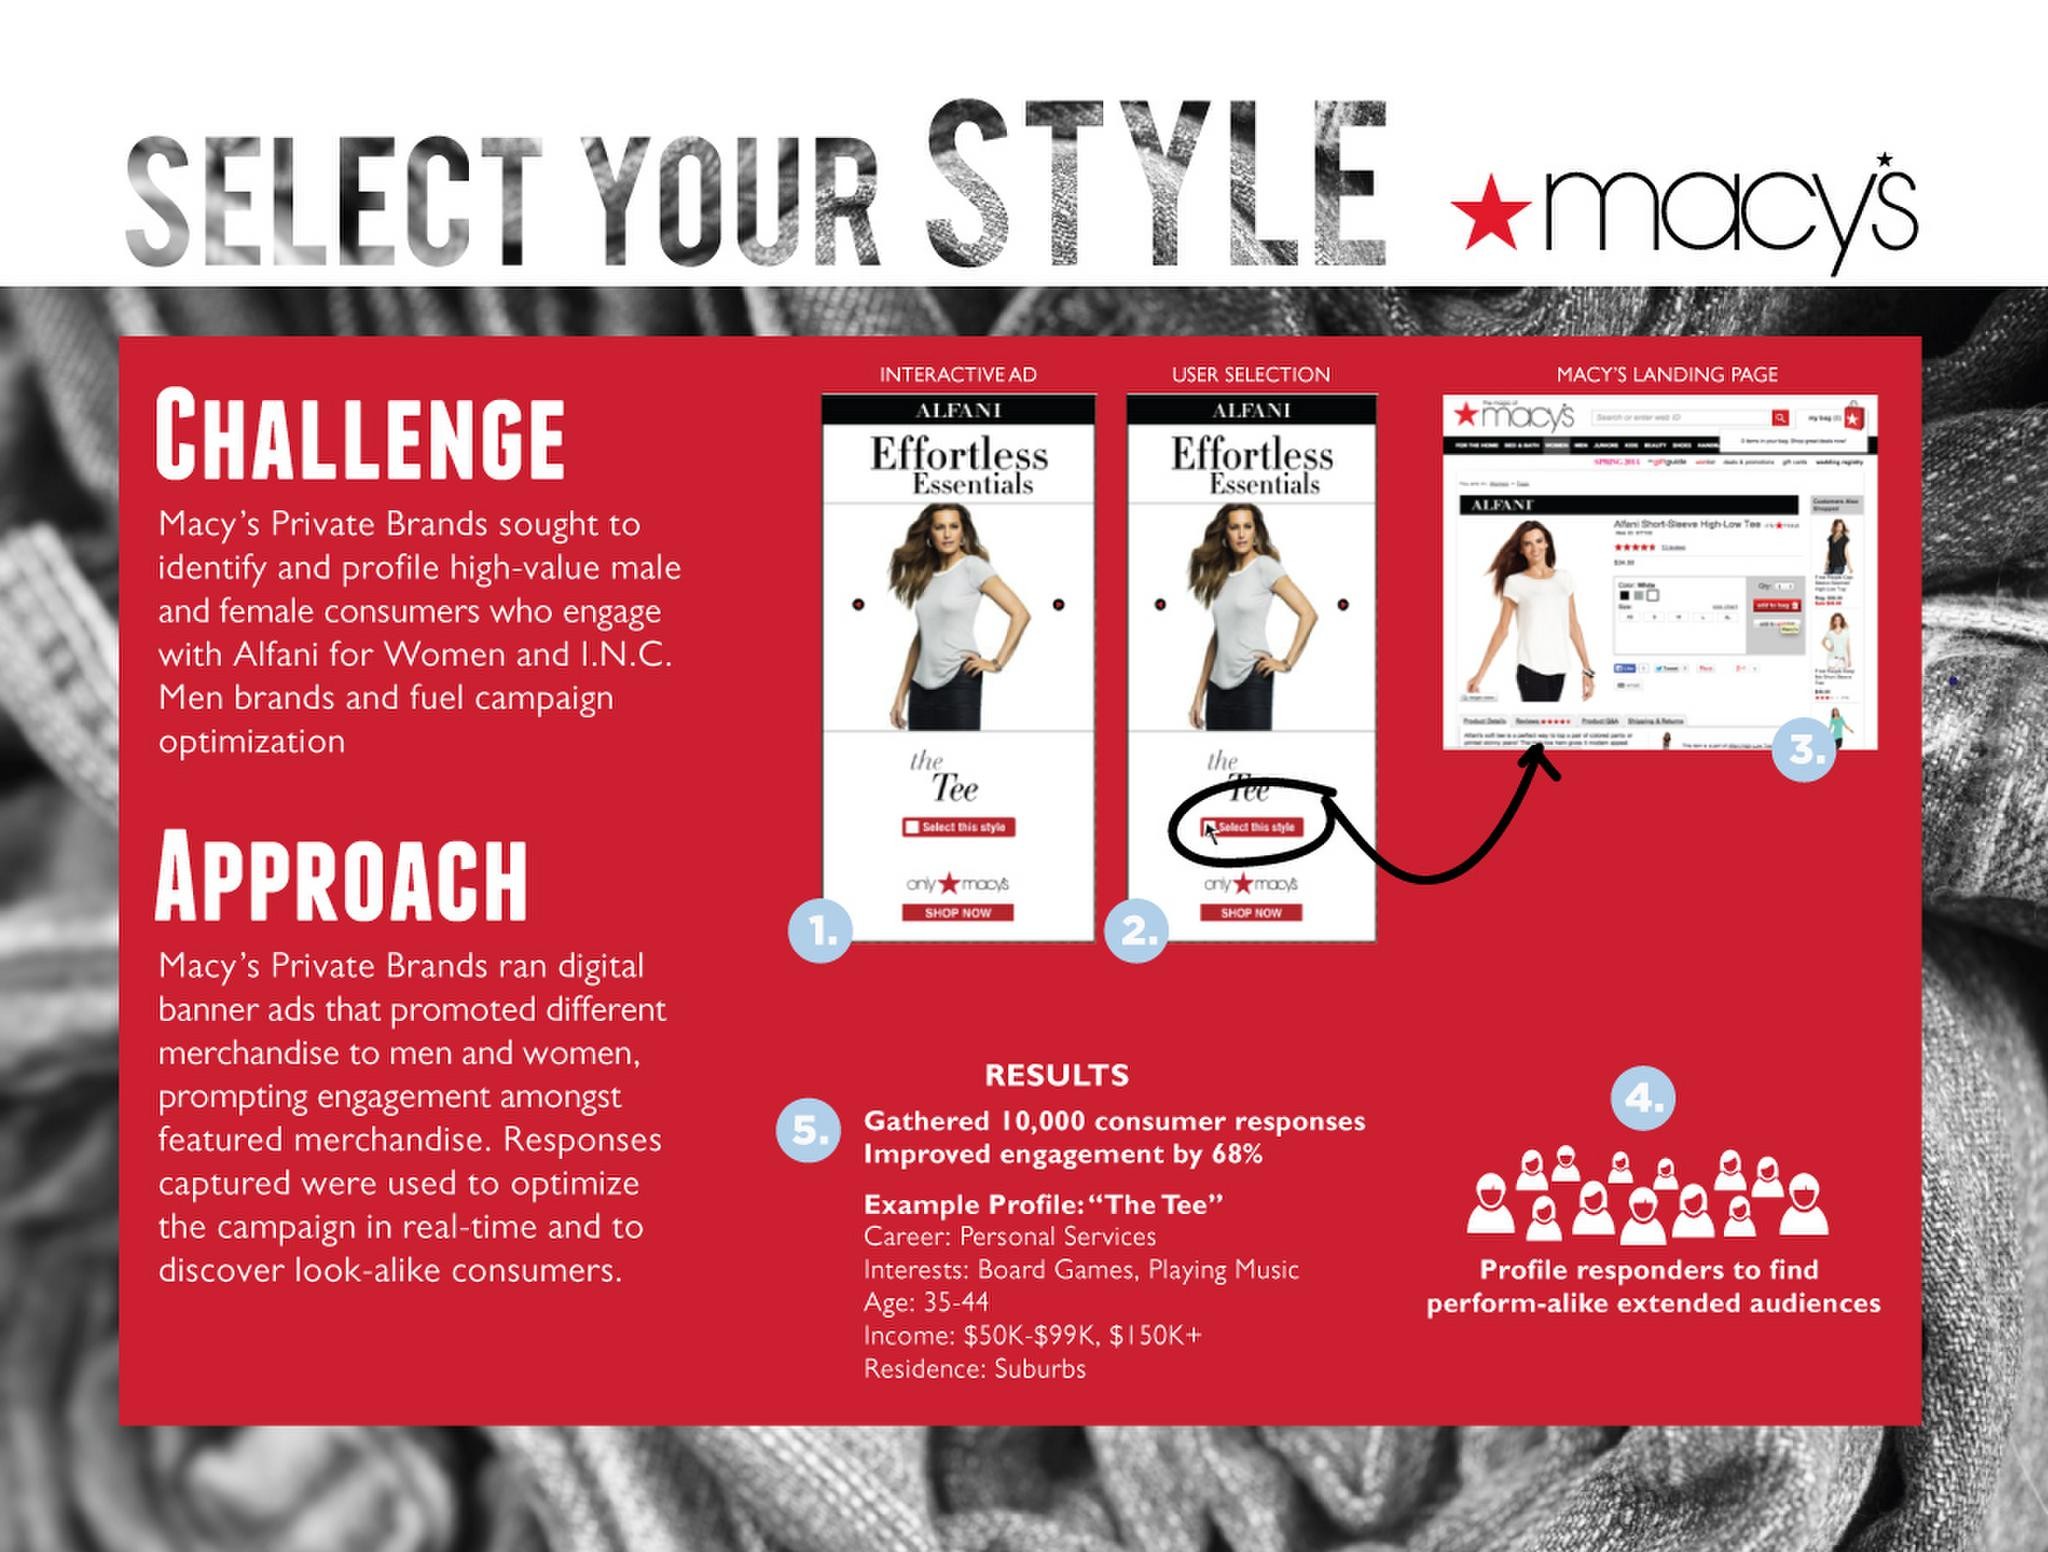 AUDIENCE PROFILING CAMPAIGN FOR MACY'S PRIVATE BRANDS